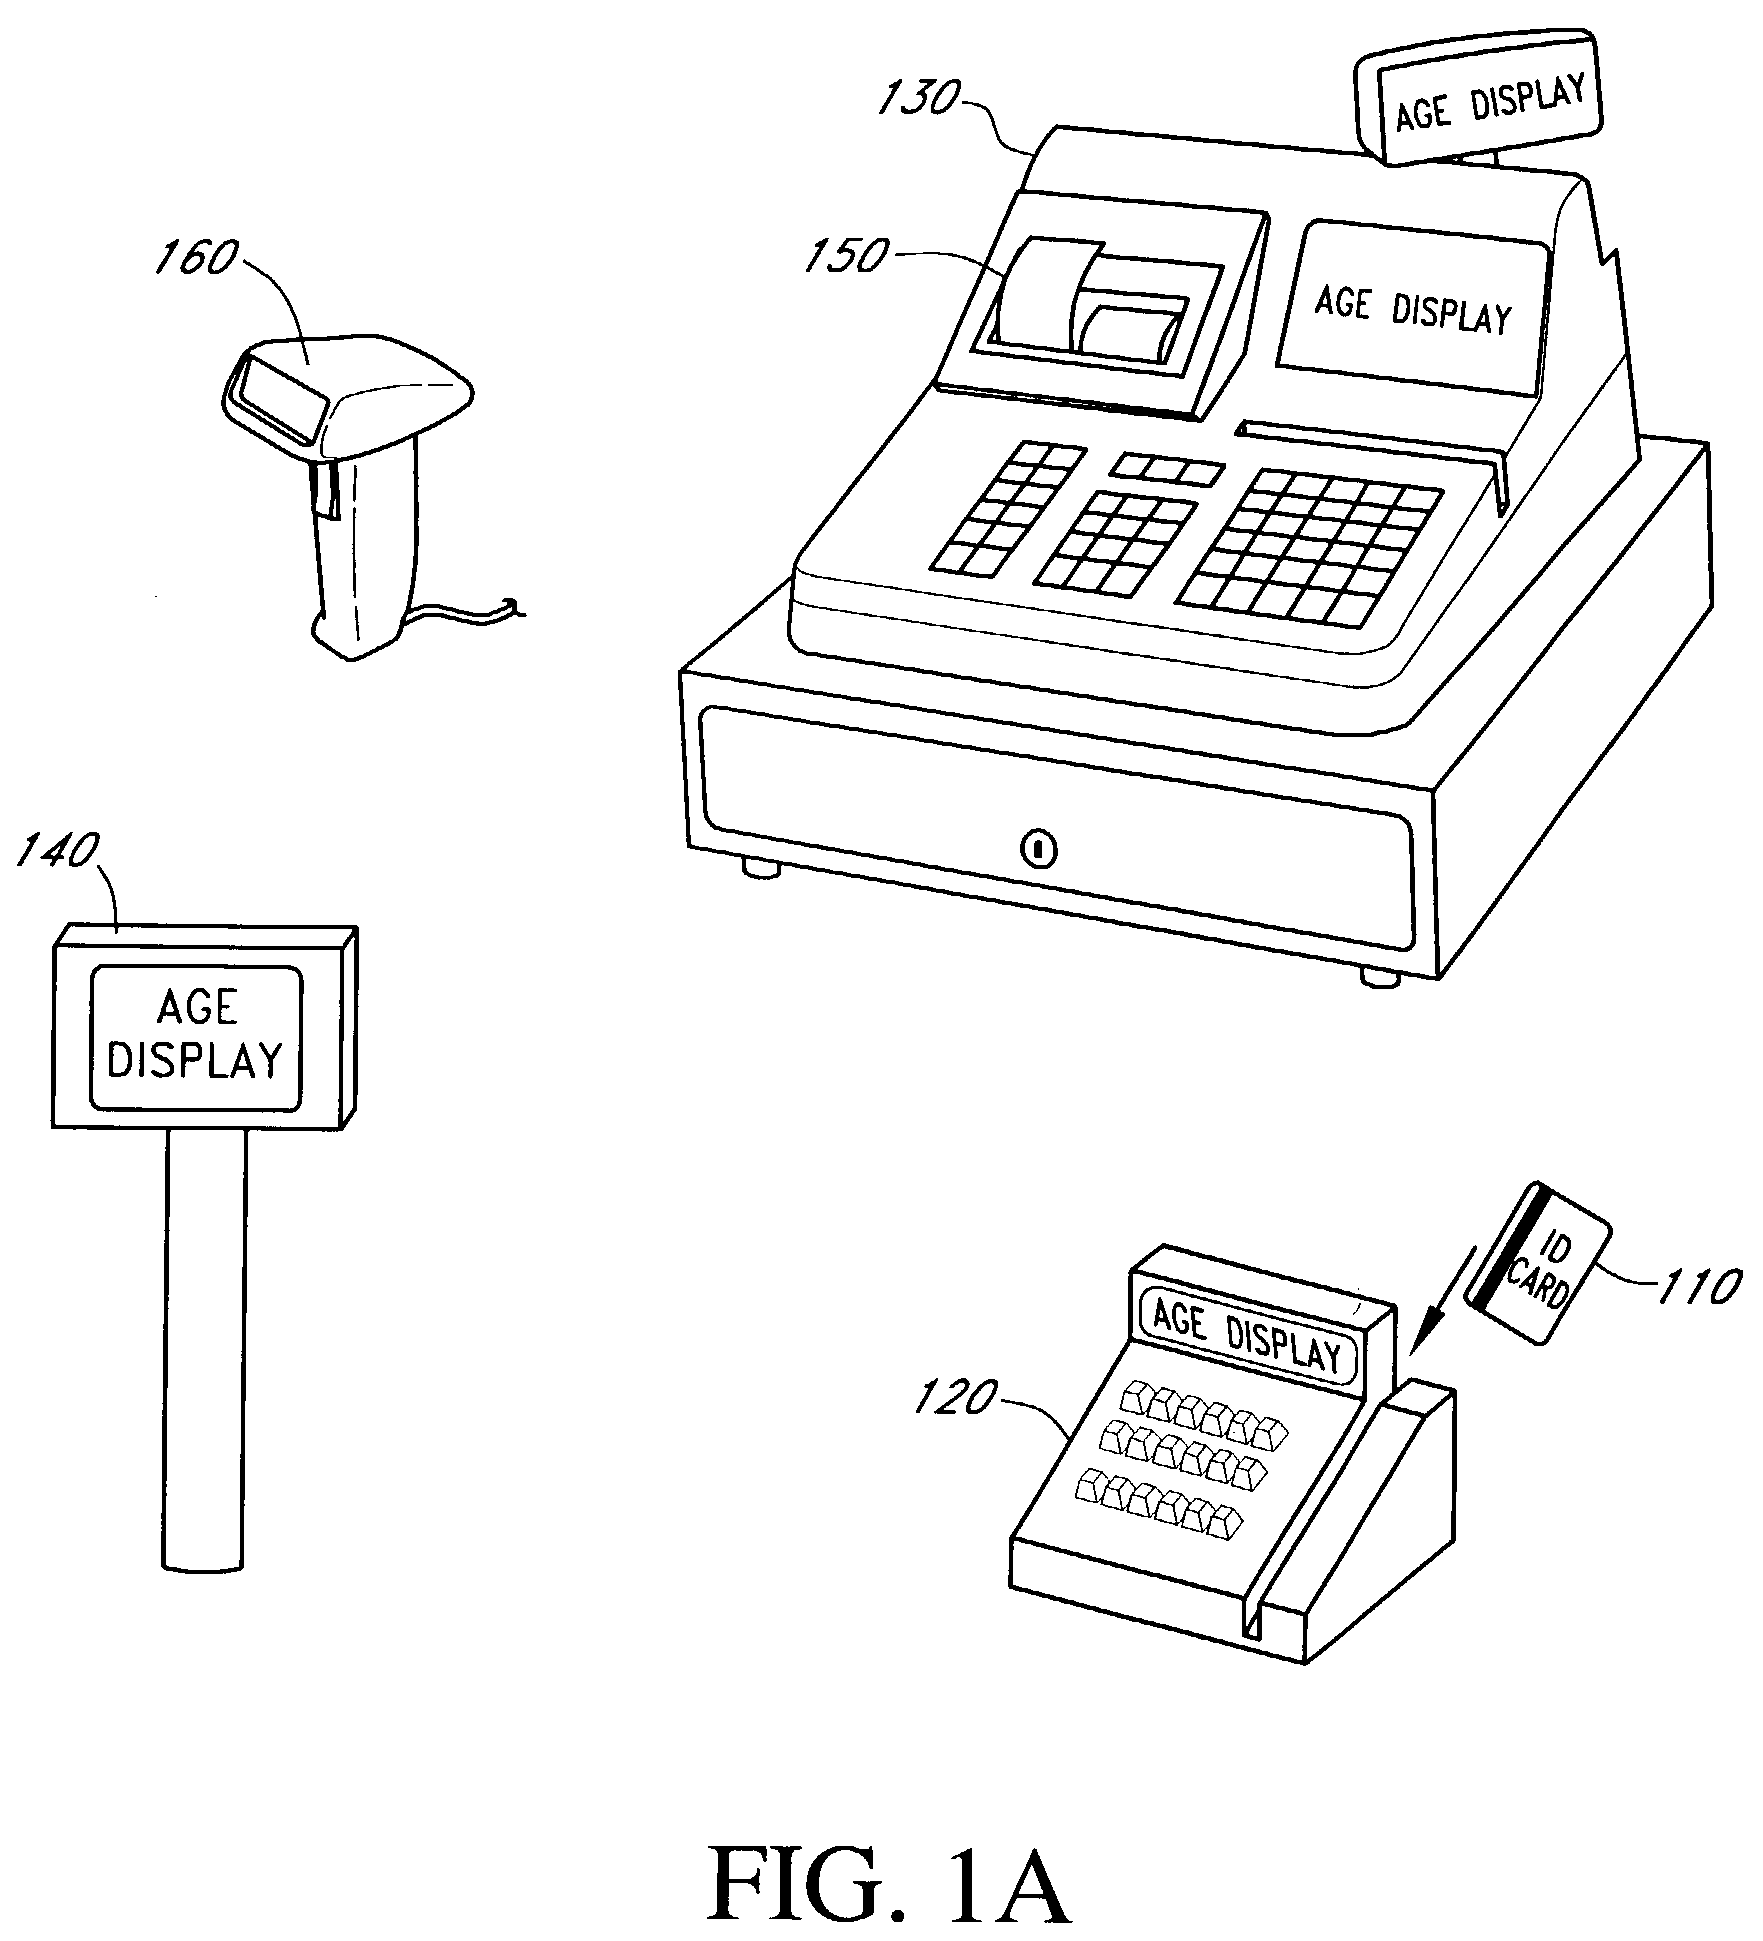 Systems and methods for verifying authorization for electronic commerce